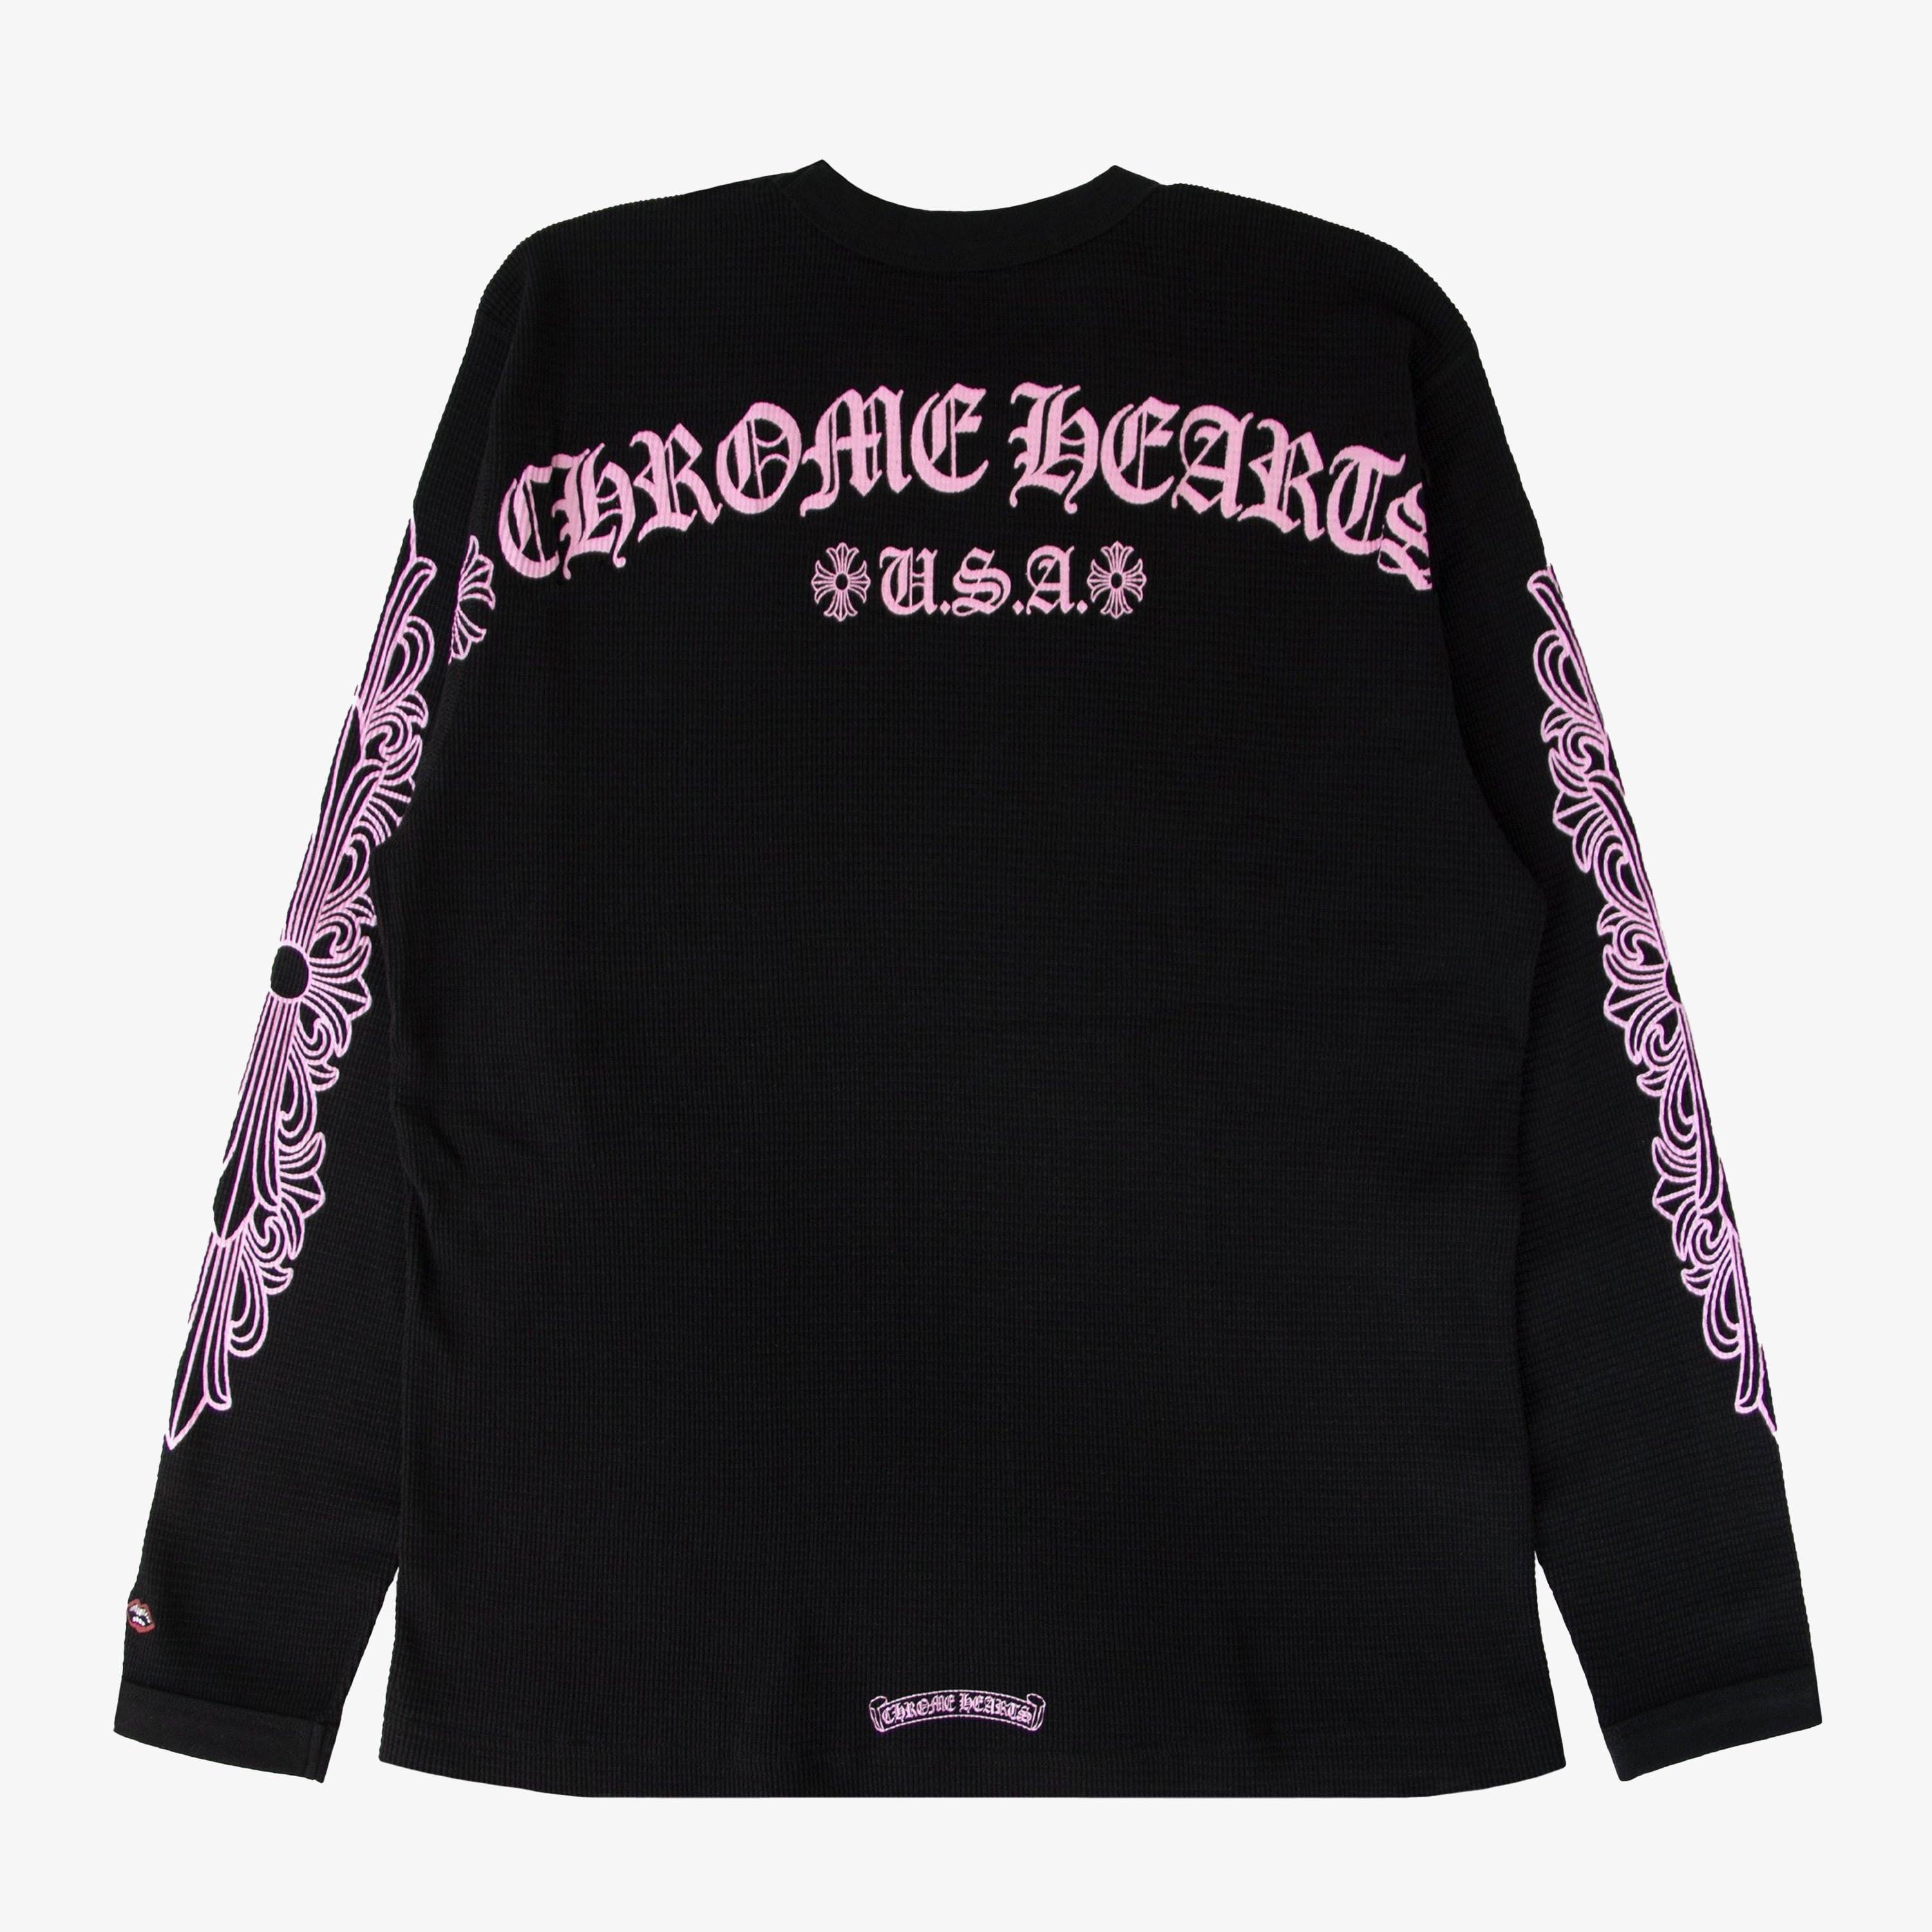 Shop CHROME HEARTS CH PLUS Limited Store Exclusive Tee (L/S) by